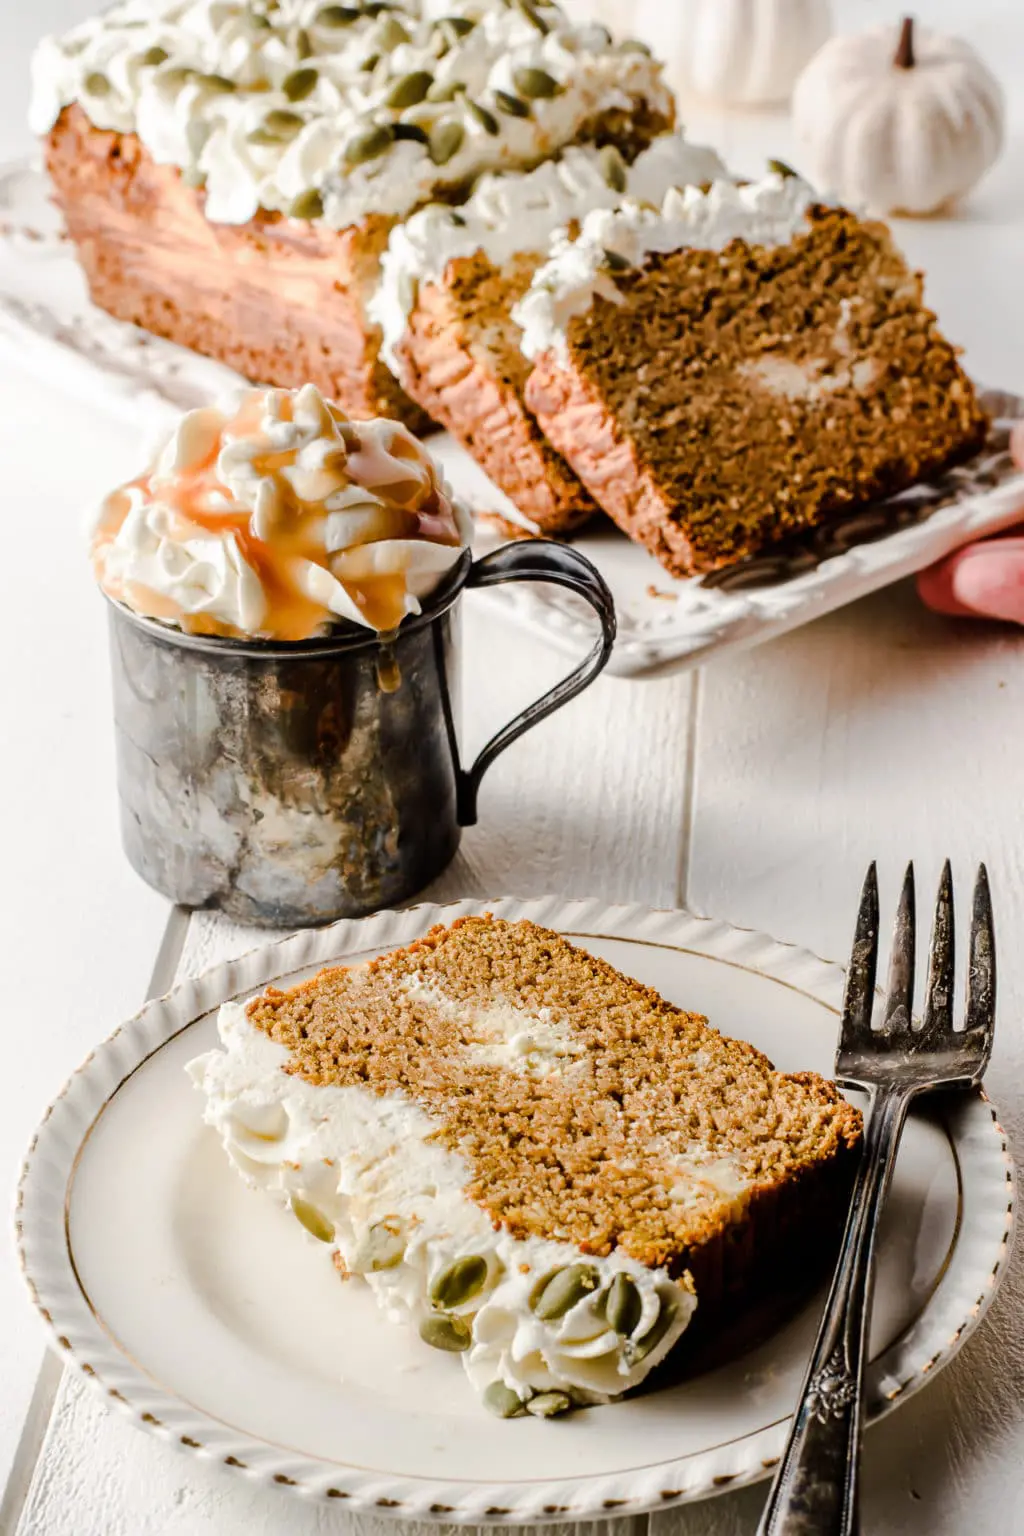 A slice of low carb pumpkin bread on a plate, with a hot beverage loaded with whipped cream and caramel sauce.